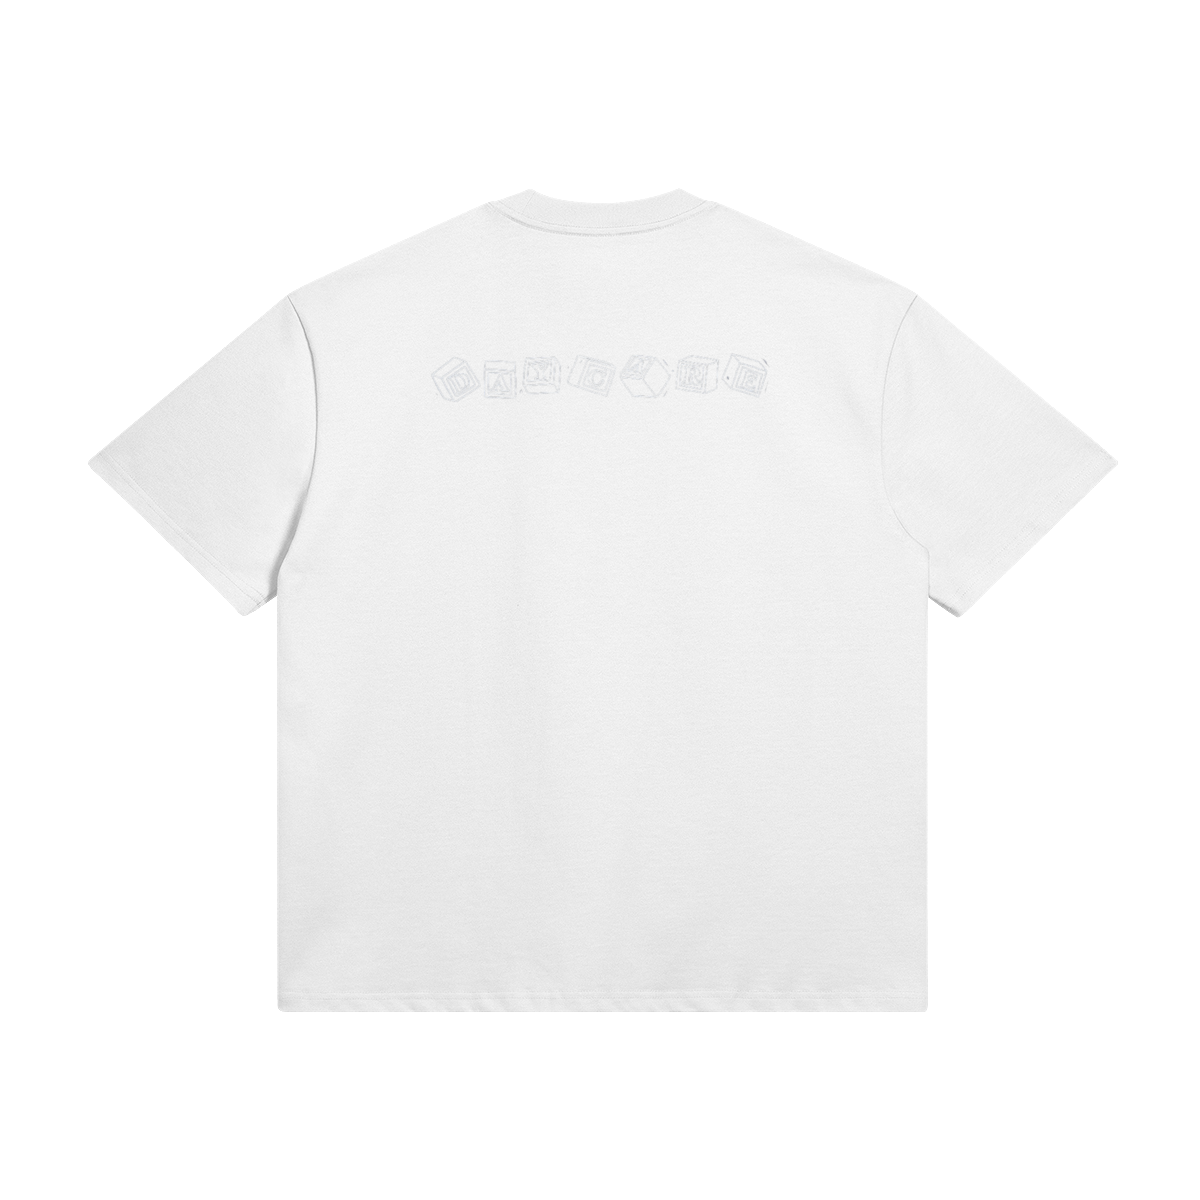 DAYCARE WHITE T-SHIRT